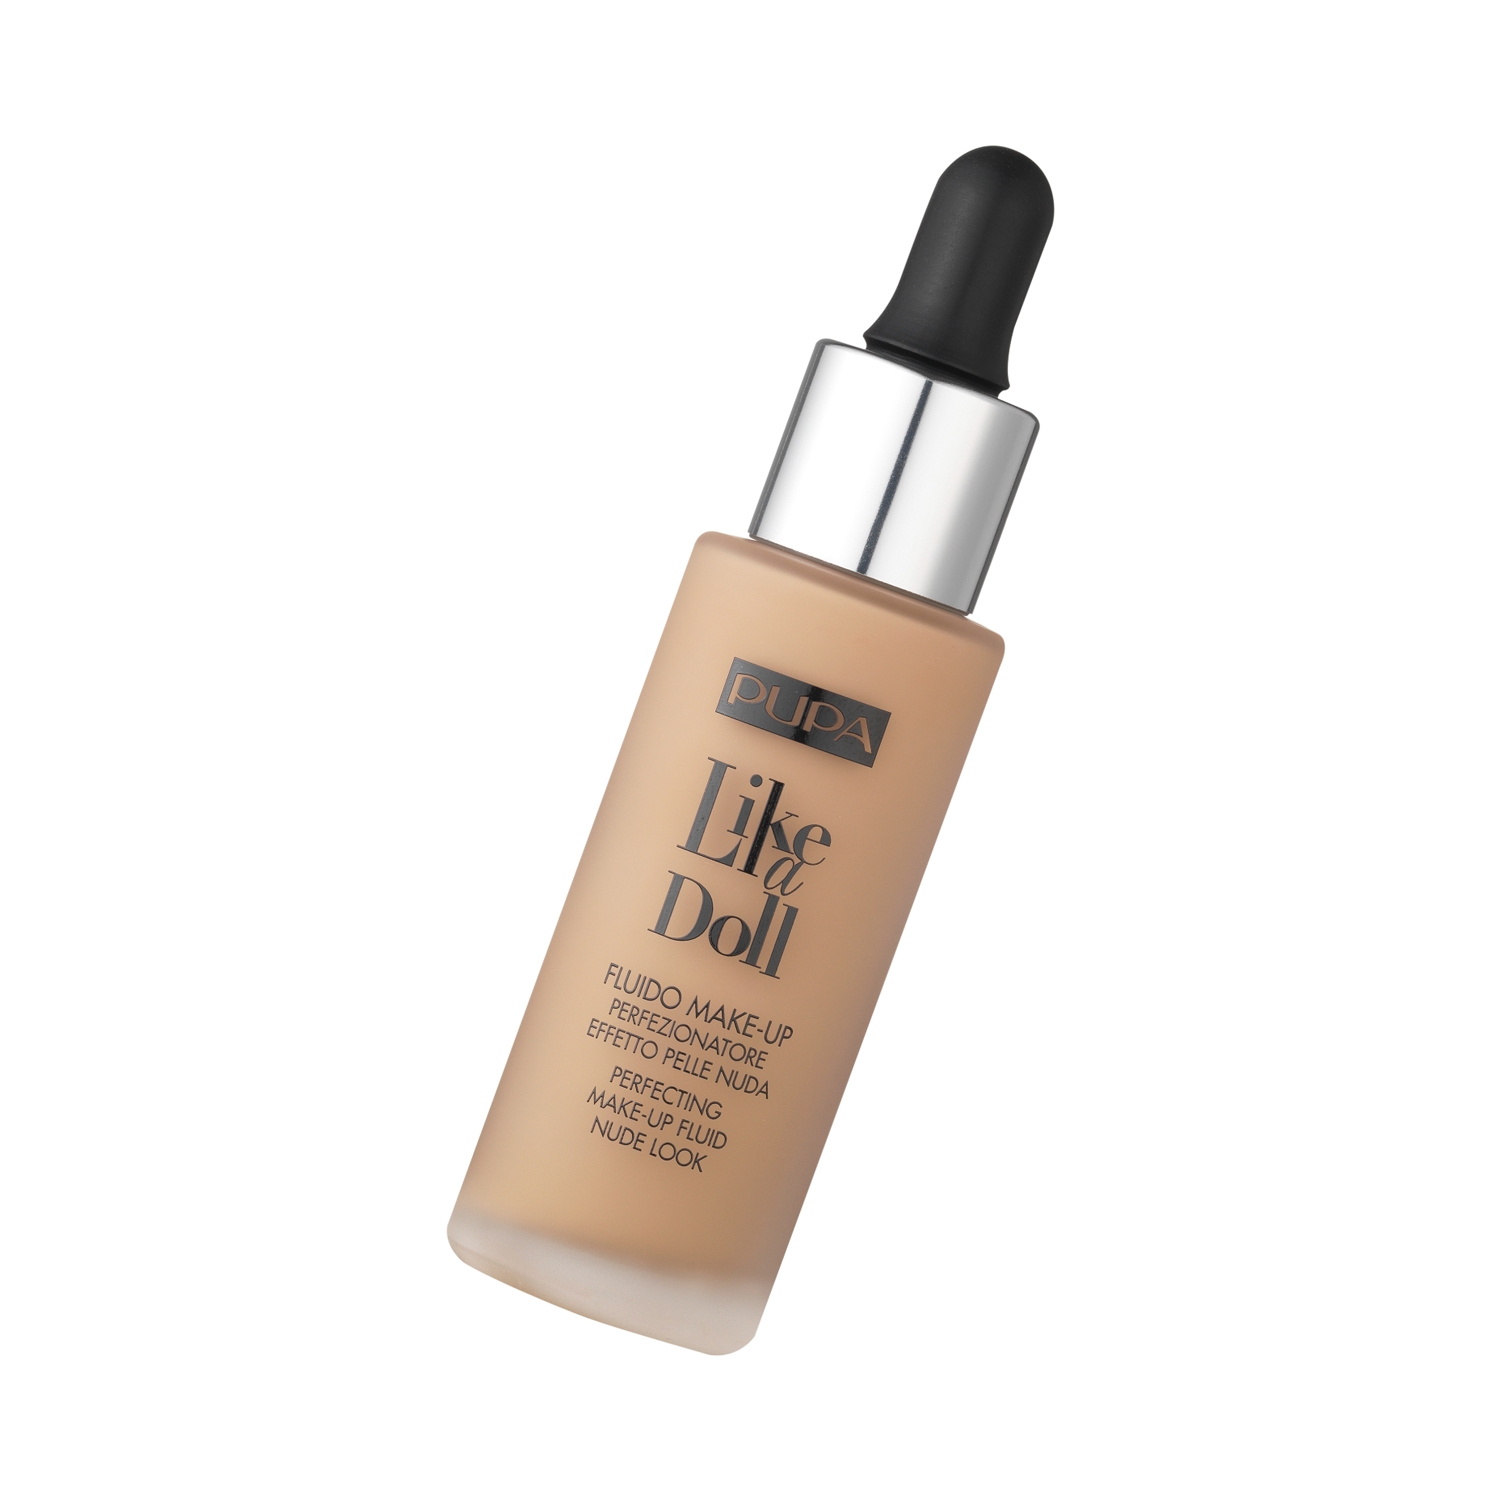 Pupa Milano | Pupa Milano Like A Doll Perfecting Makeup Fluid Foundation - 030 Natural Beige (30ml)